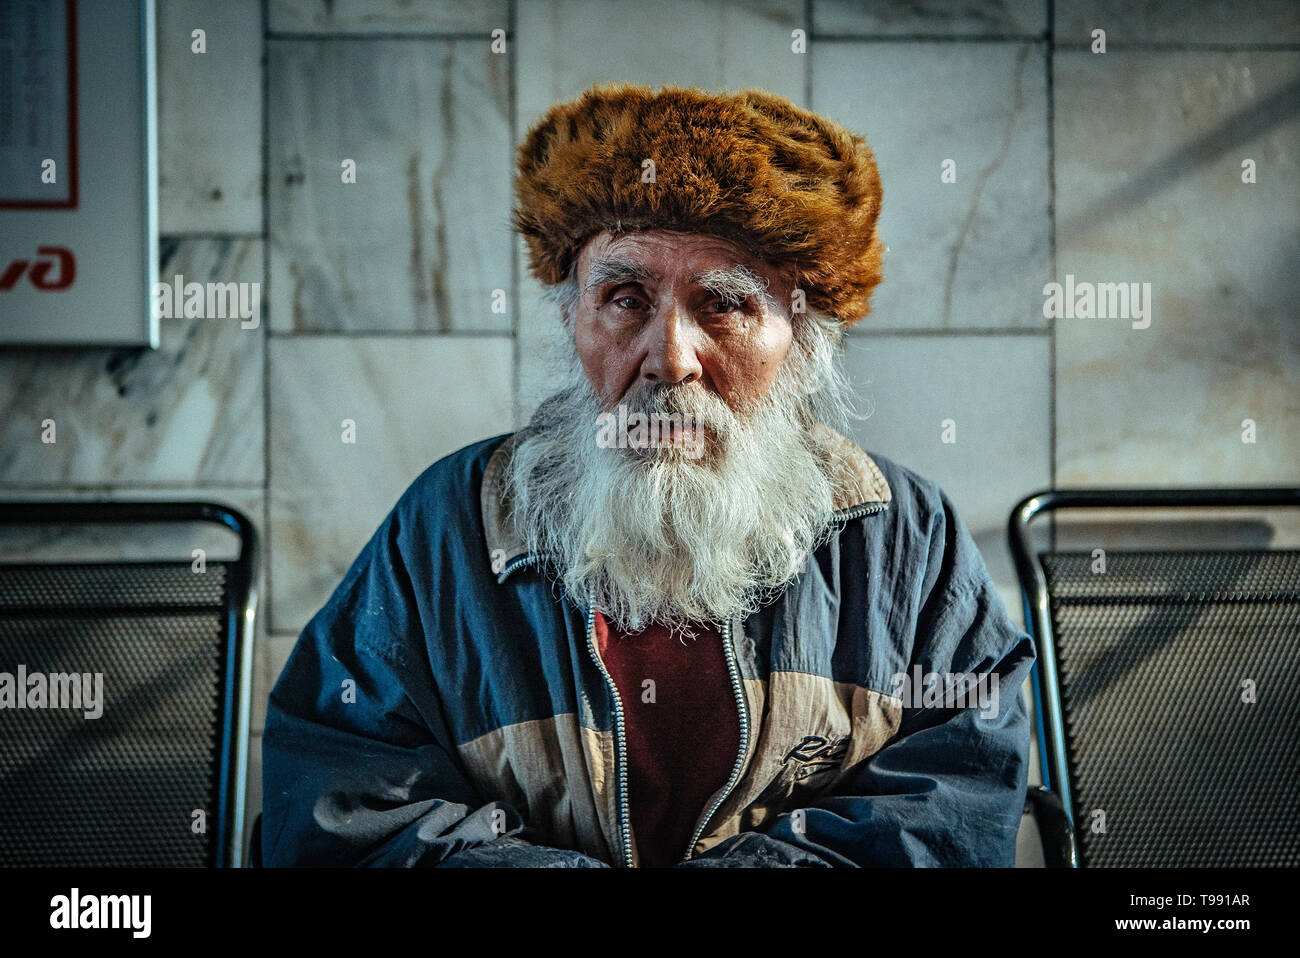 Old man with beard at the railway station in Irkutsk, Russia Stock Photo